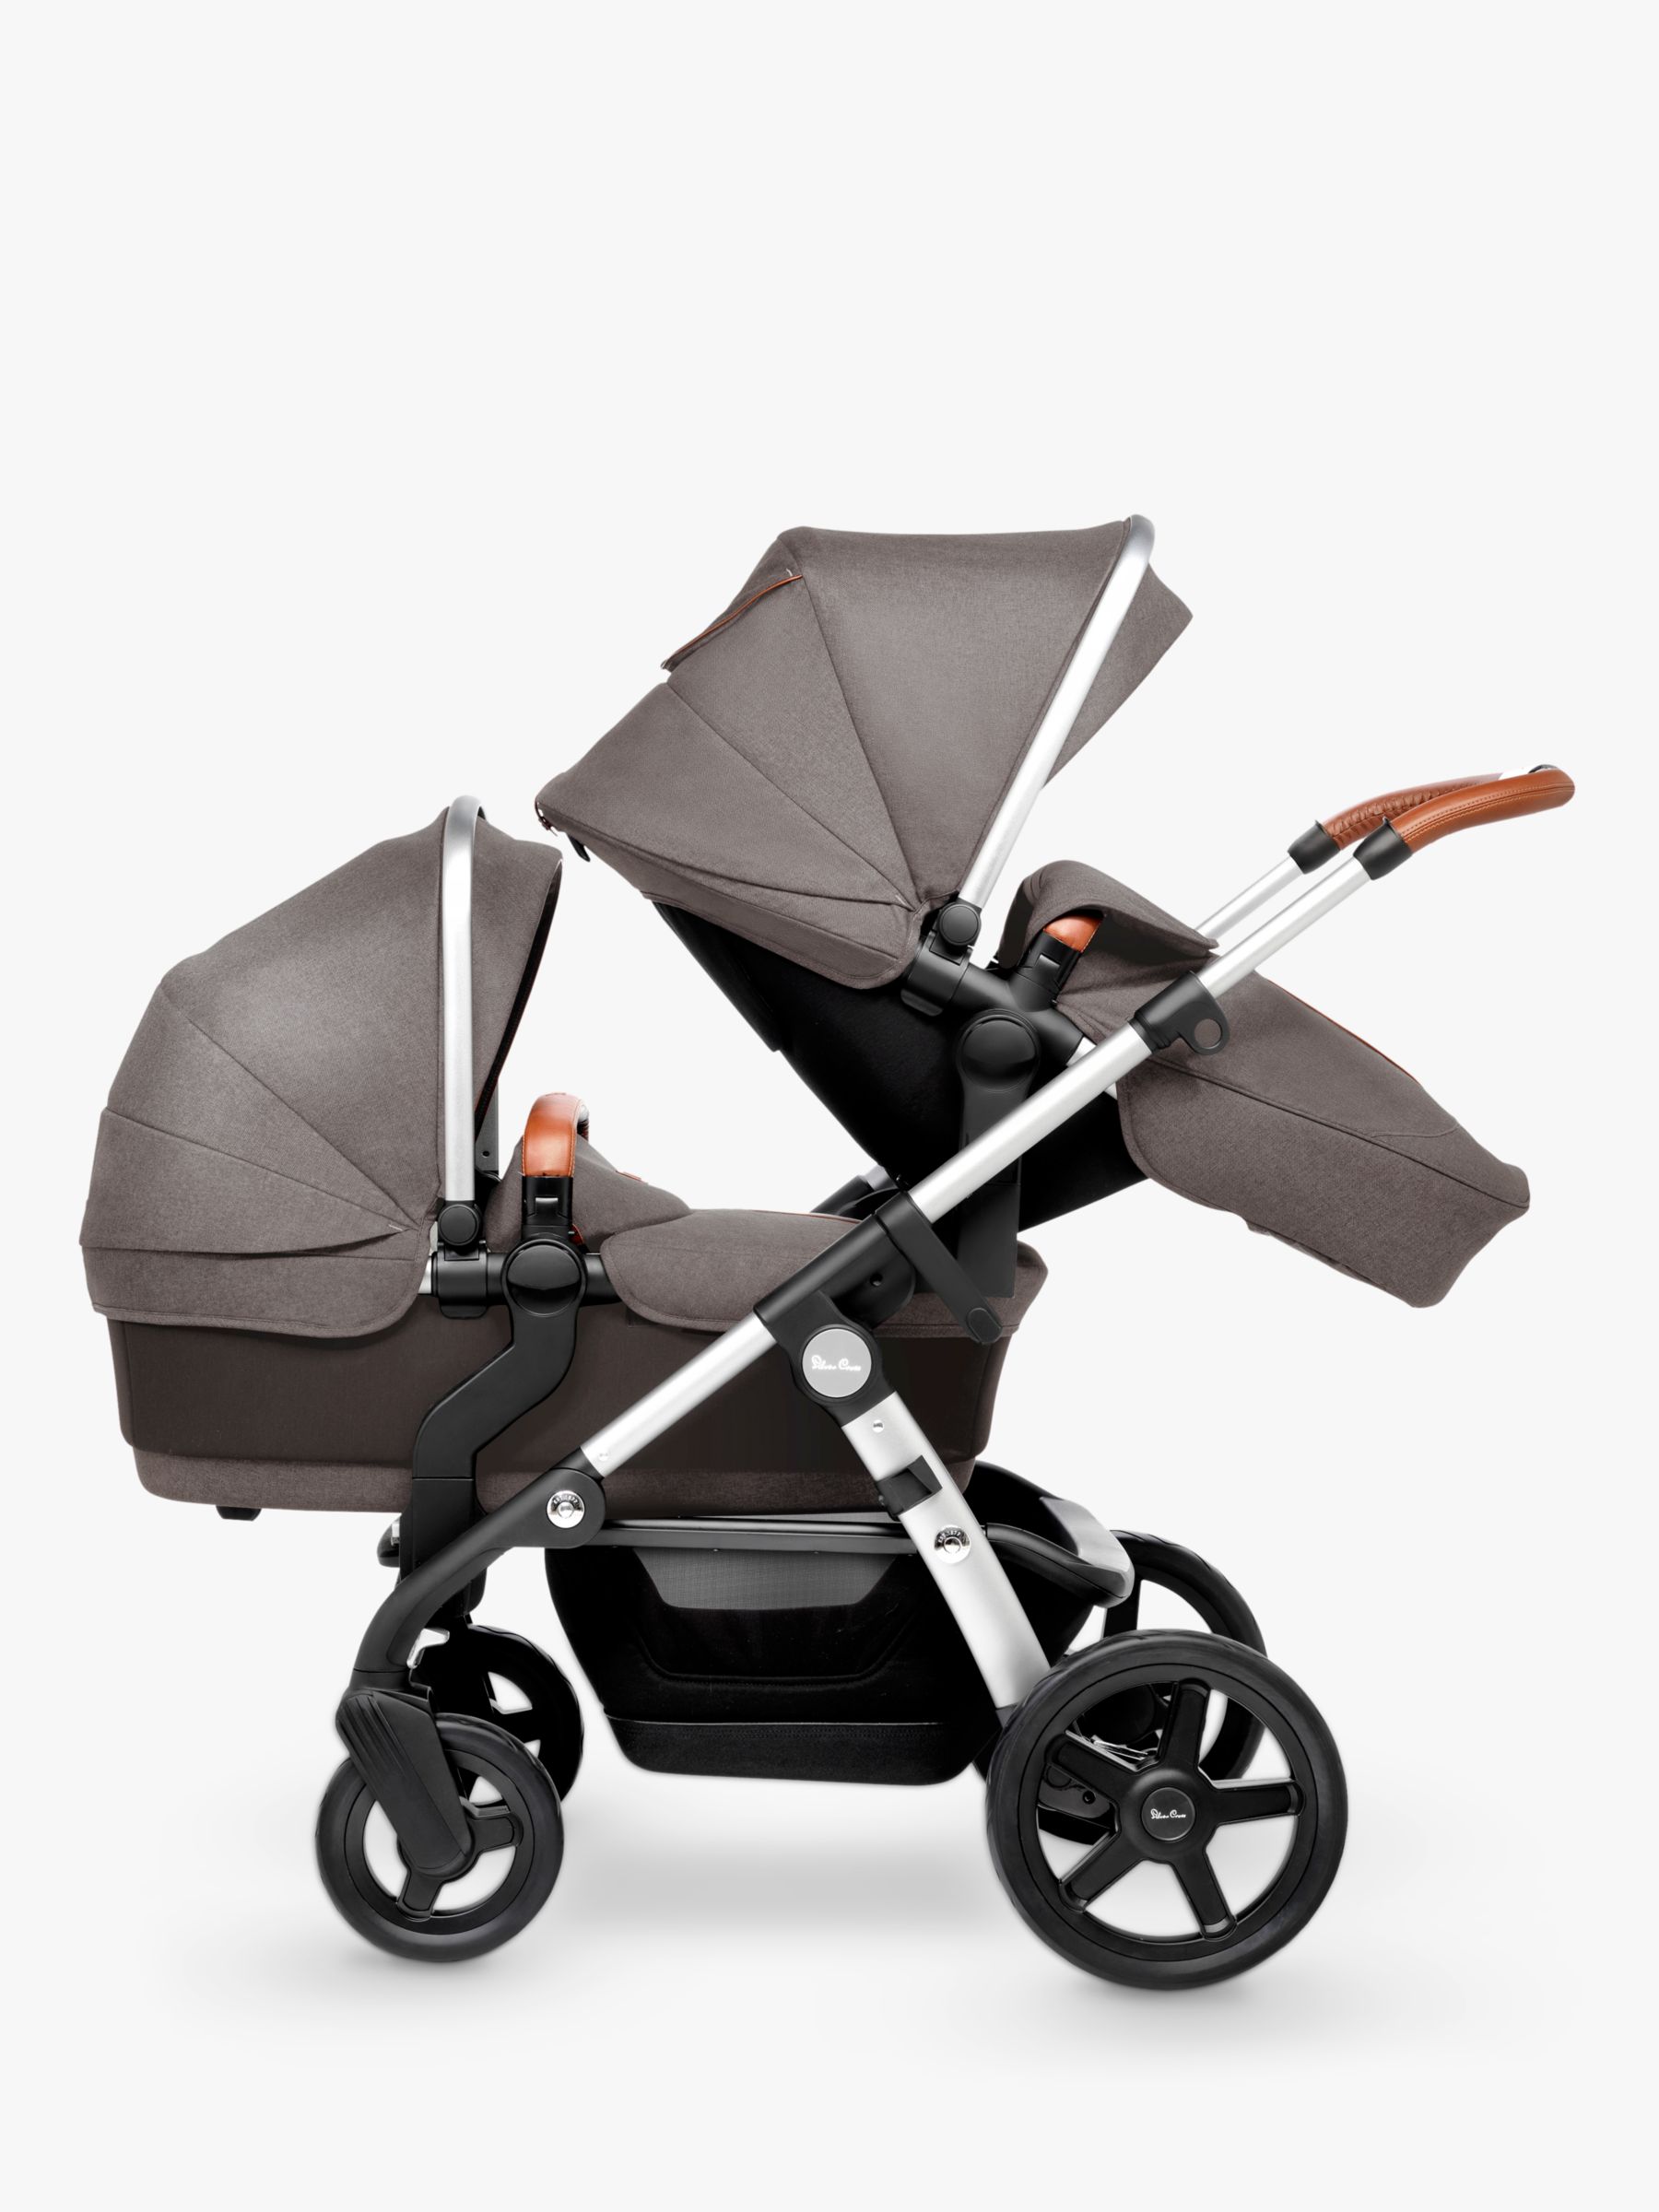 tandem pram for baby and toddler